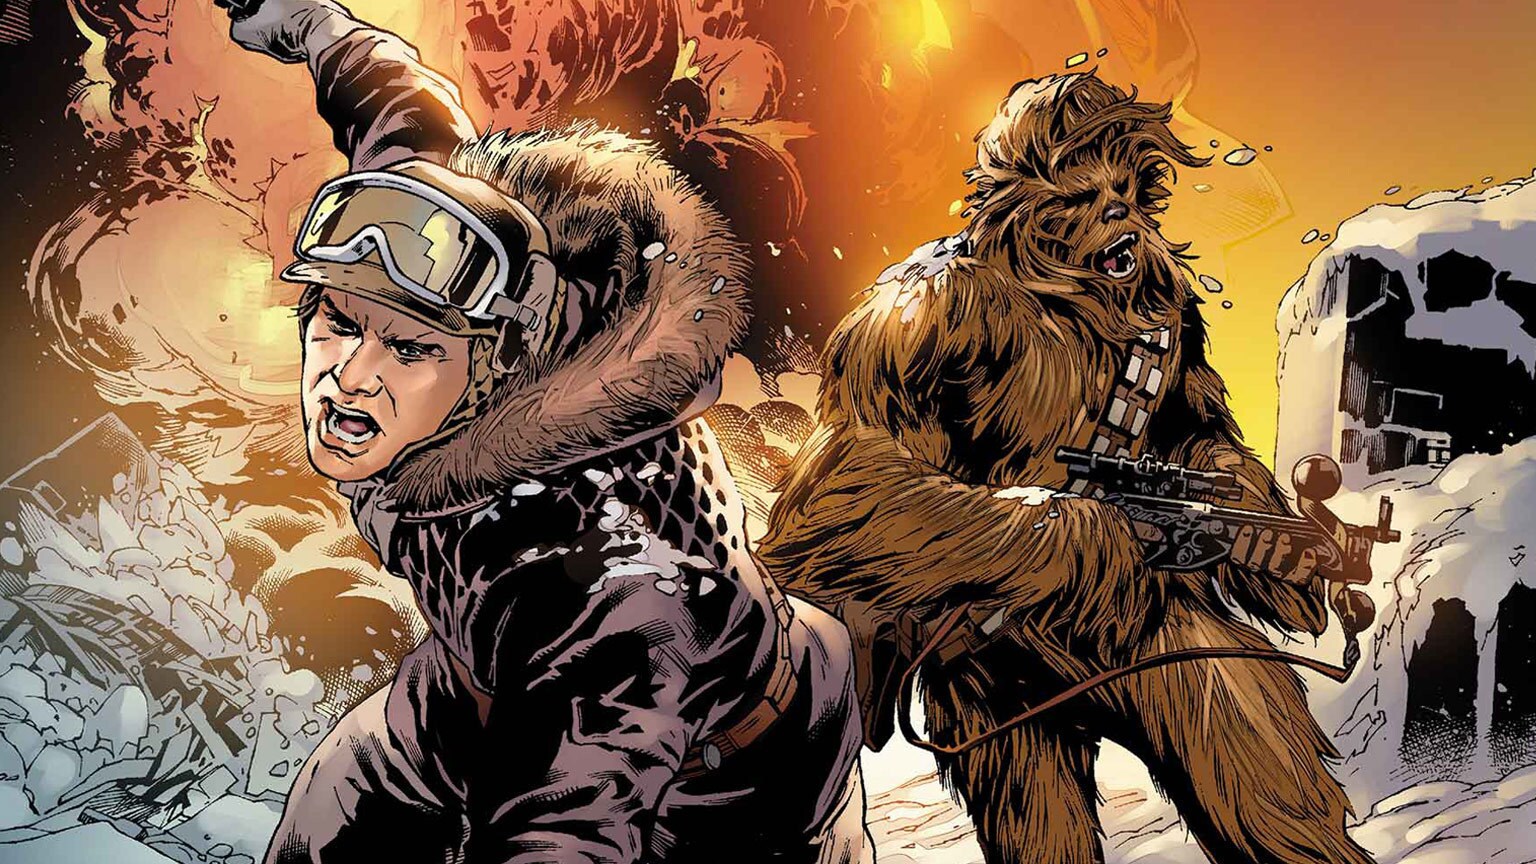 Leia Organa Swaps Love Stories with Kes Dameron and More from Marvel's March 2021 Star Wars Comics - Exclusive Preview